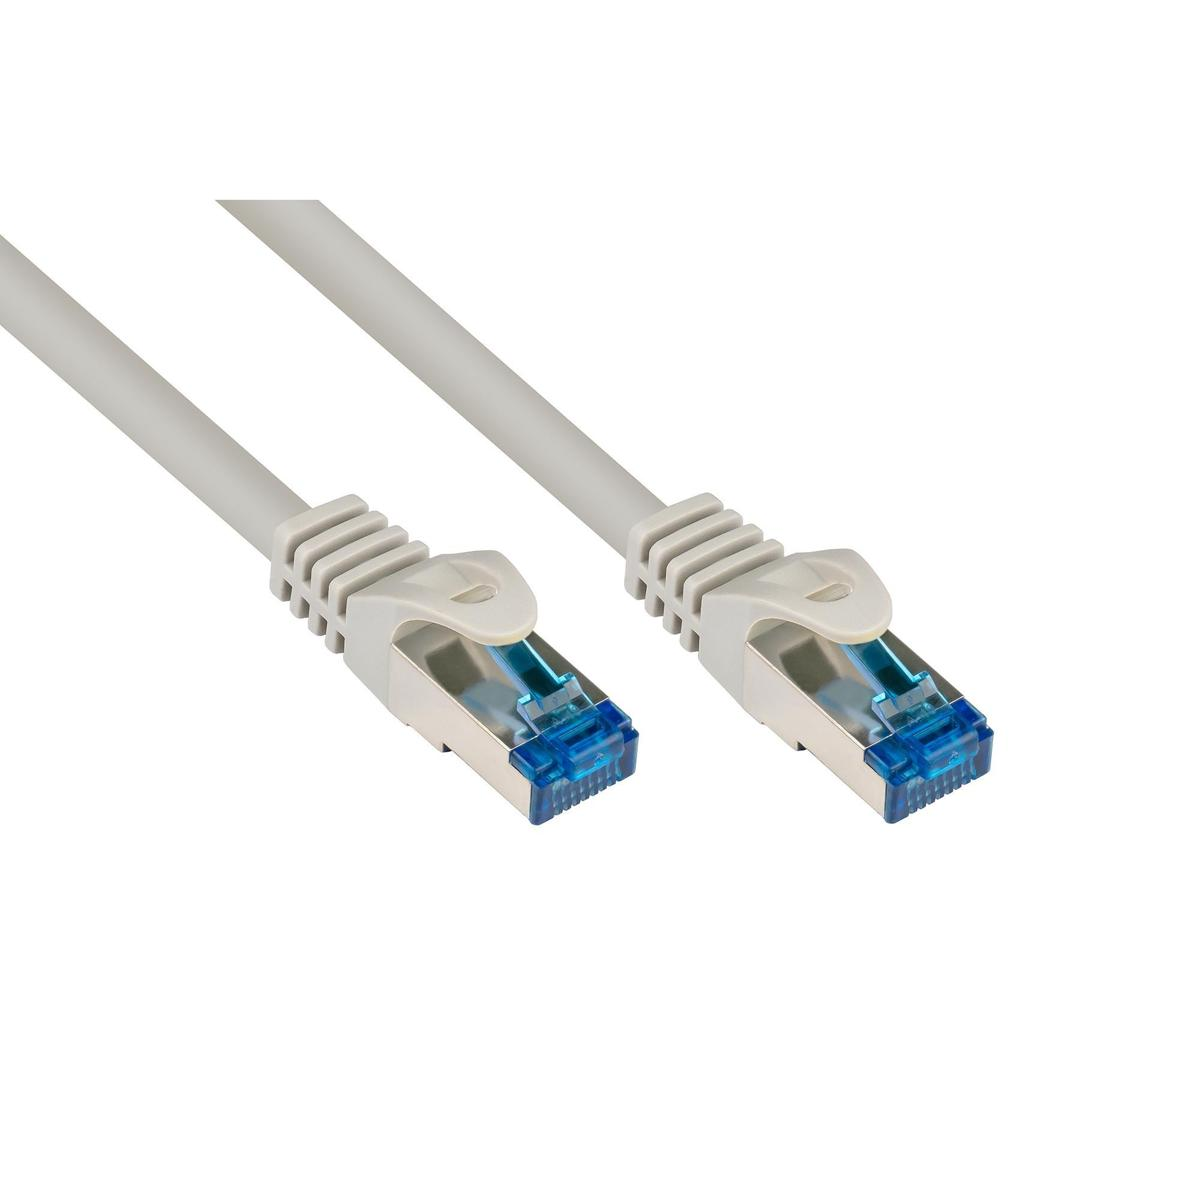 VARIA GROUP 8060-SF003 Patchcable Cat.6a, Grau